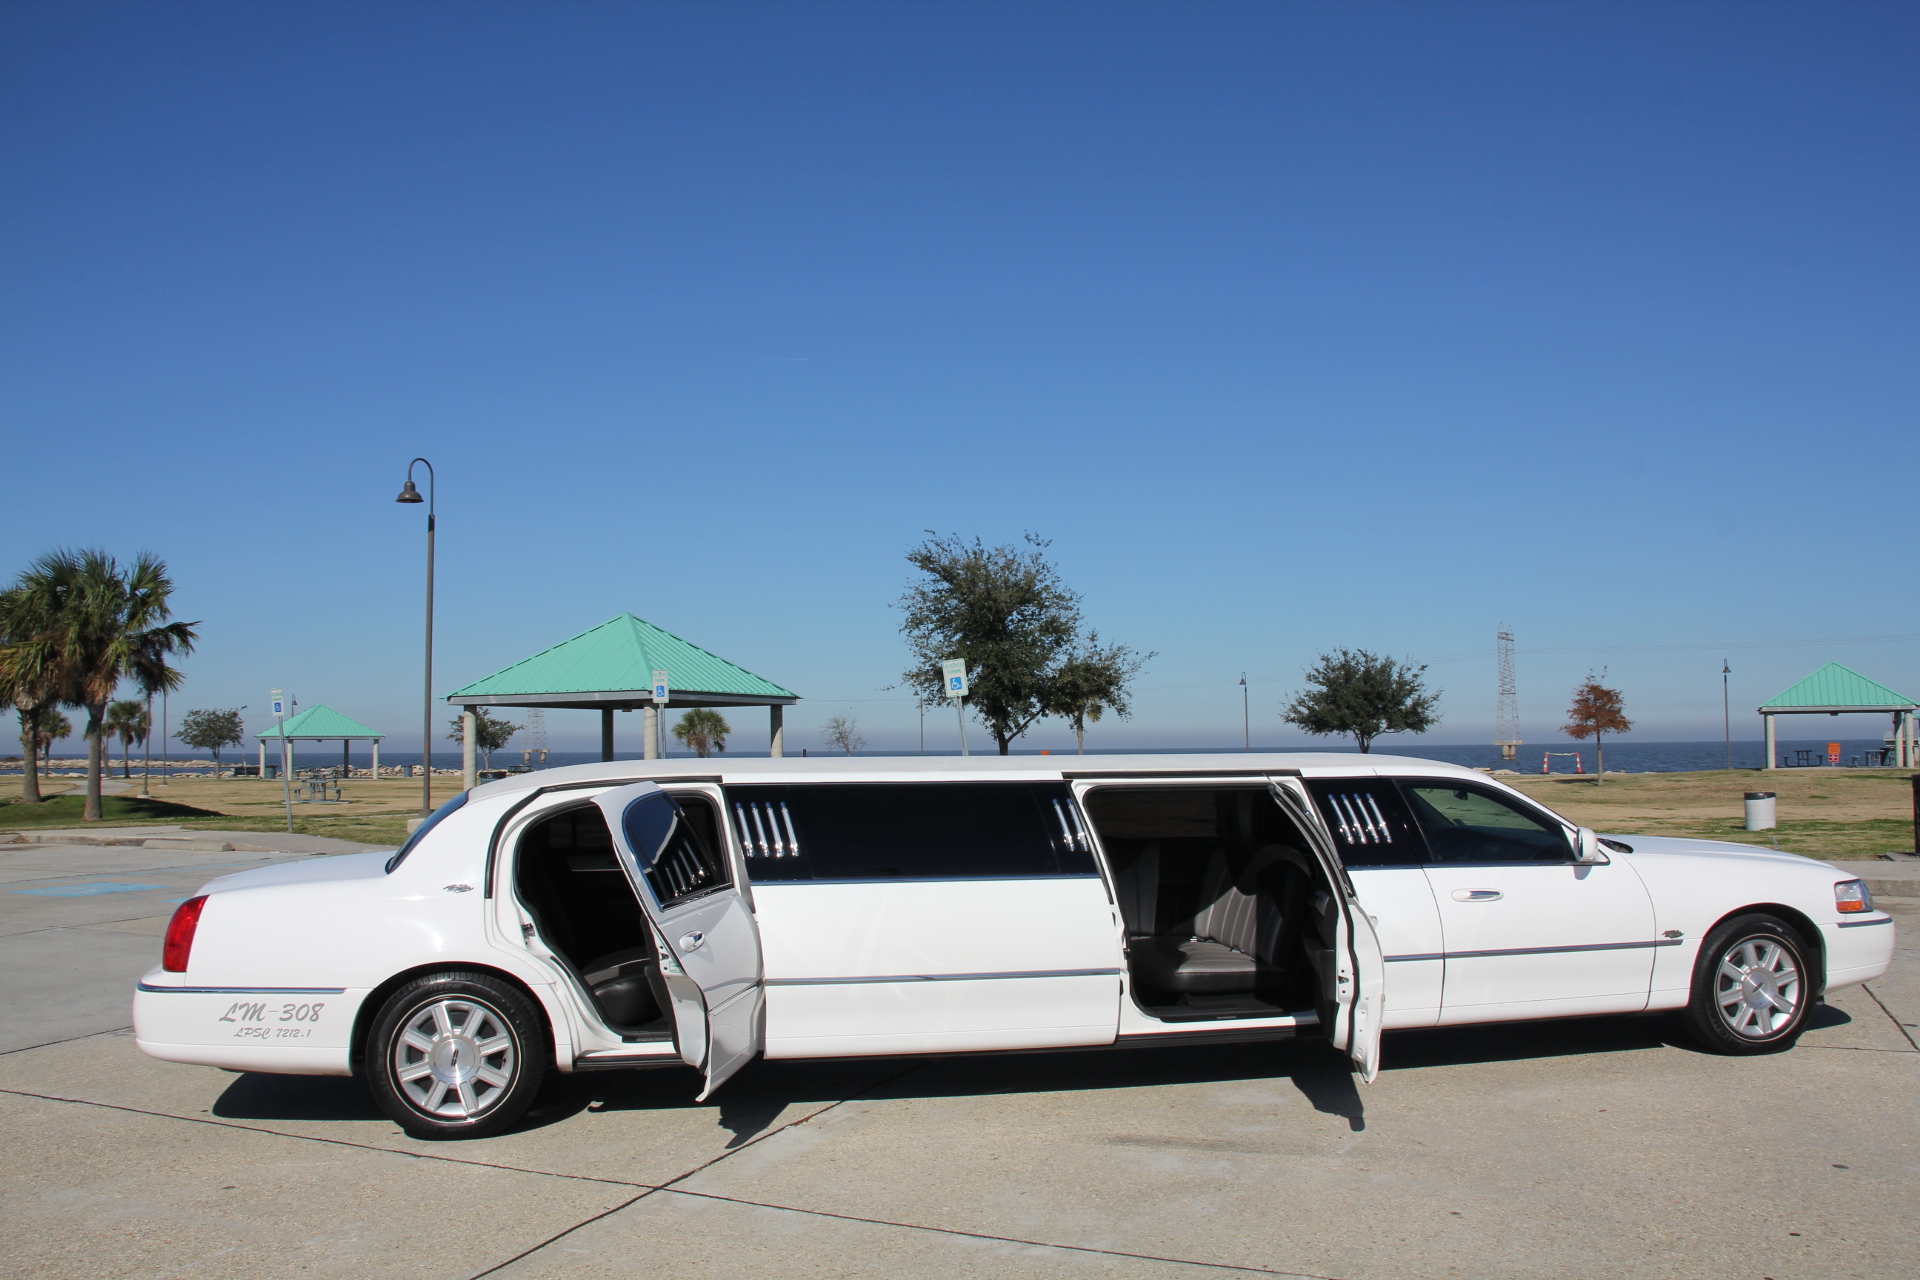 5th door new orleans limo